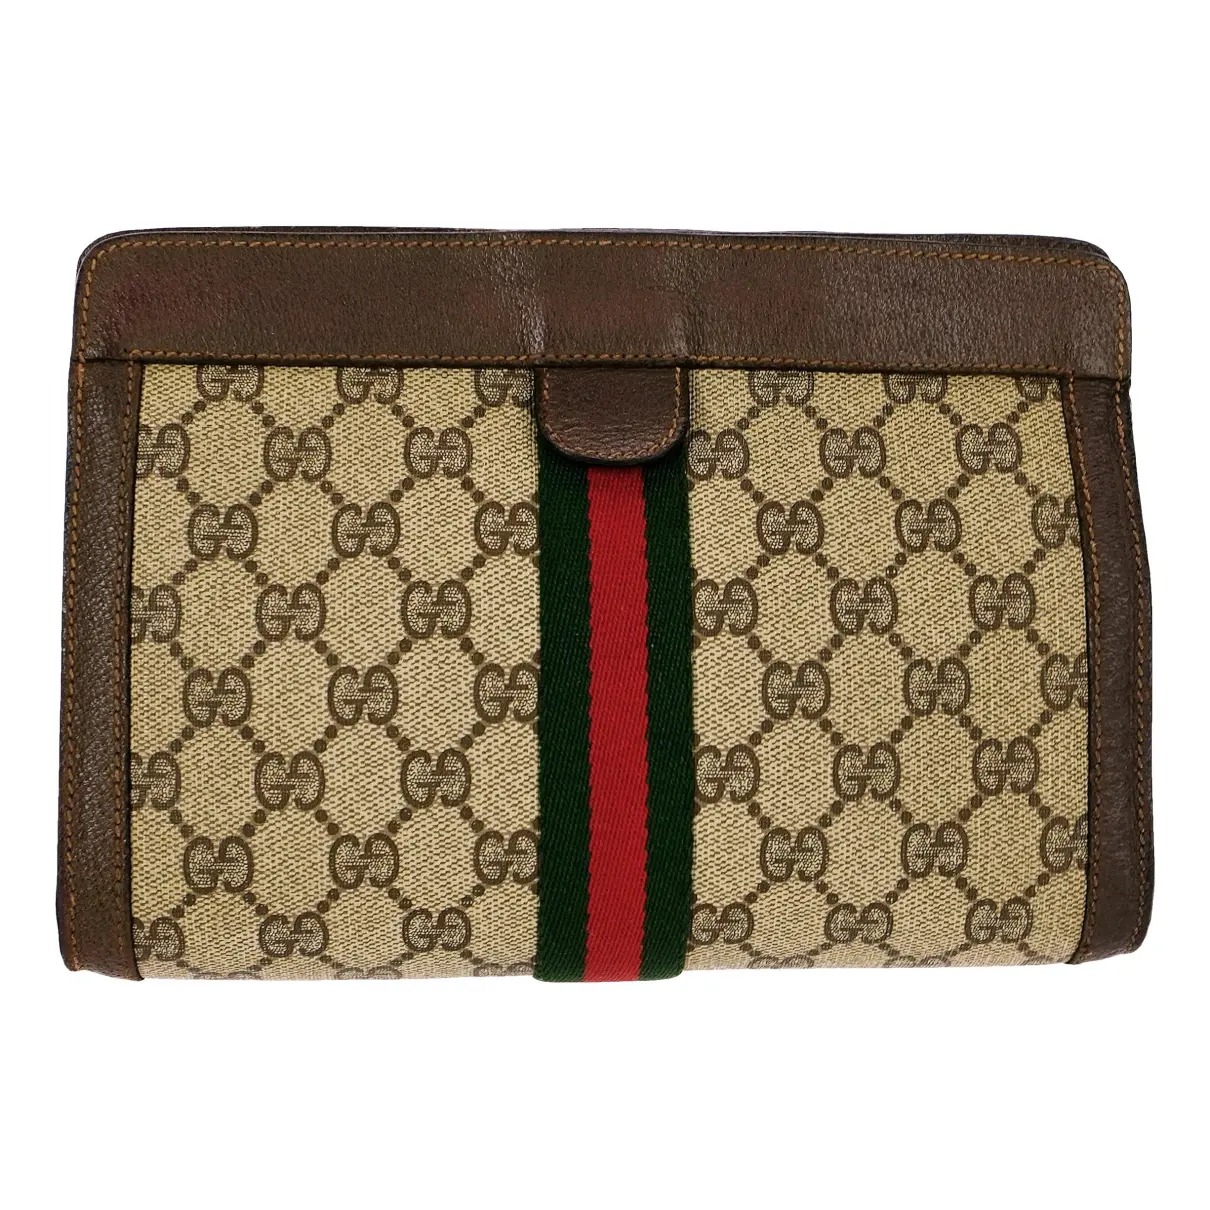 Ophidia leather vanity case Gucci - Vintage